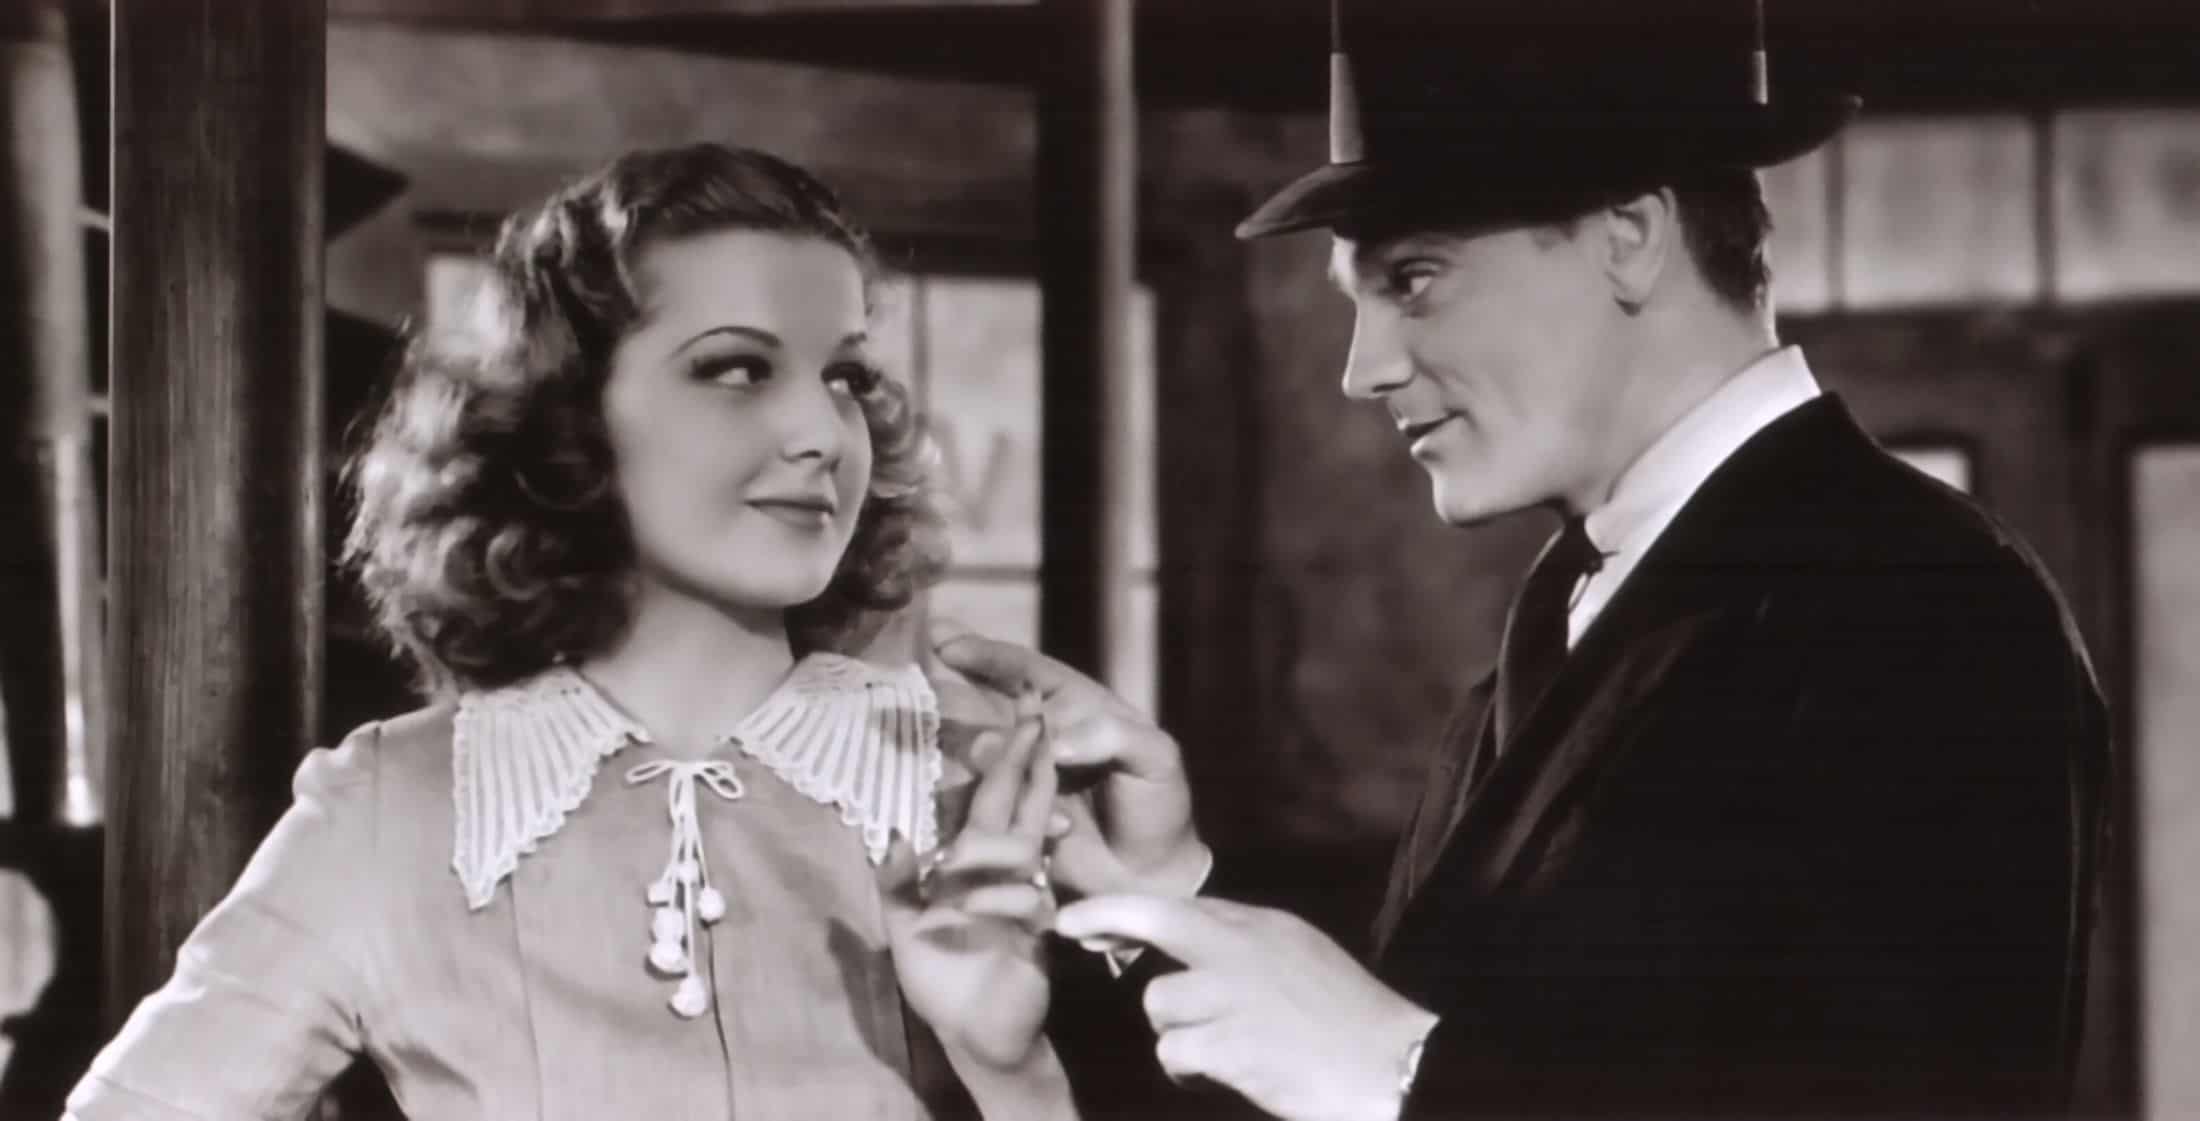 Angels With Dirty Faces (1938)